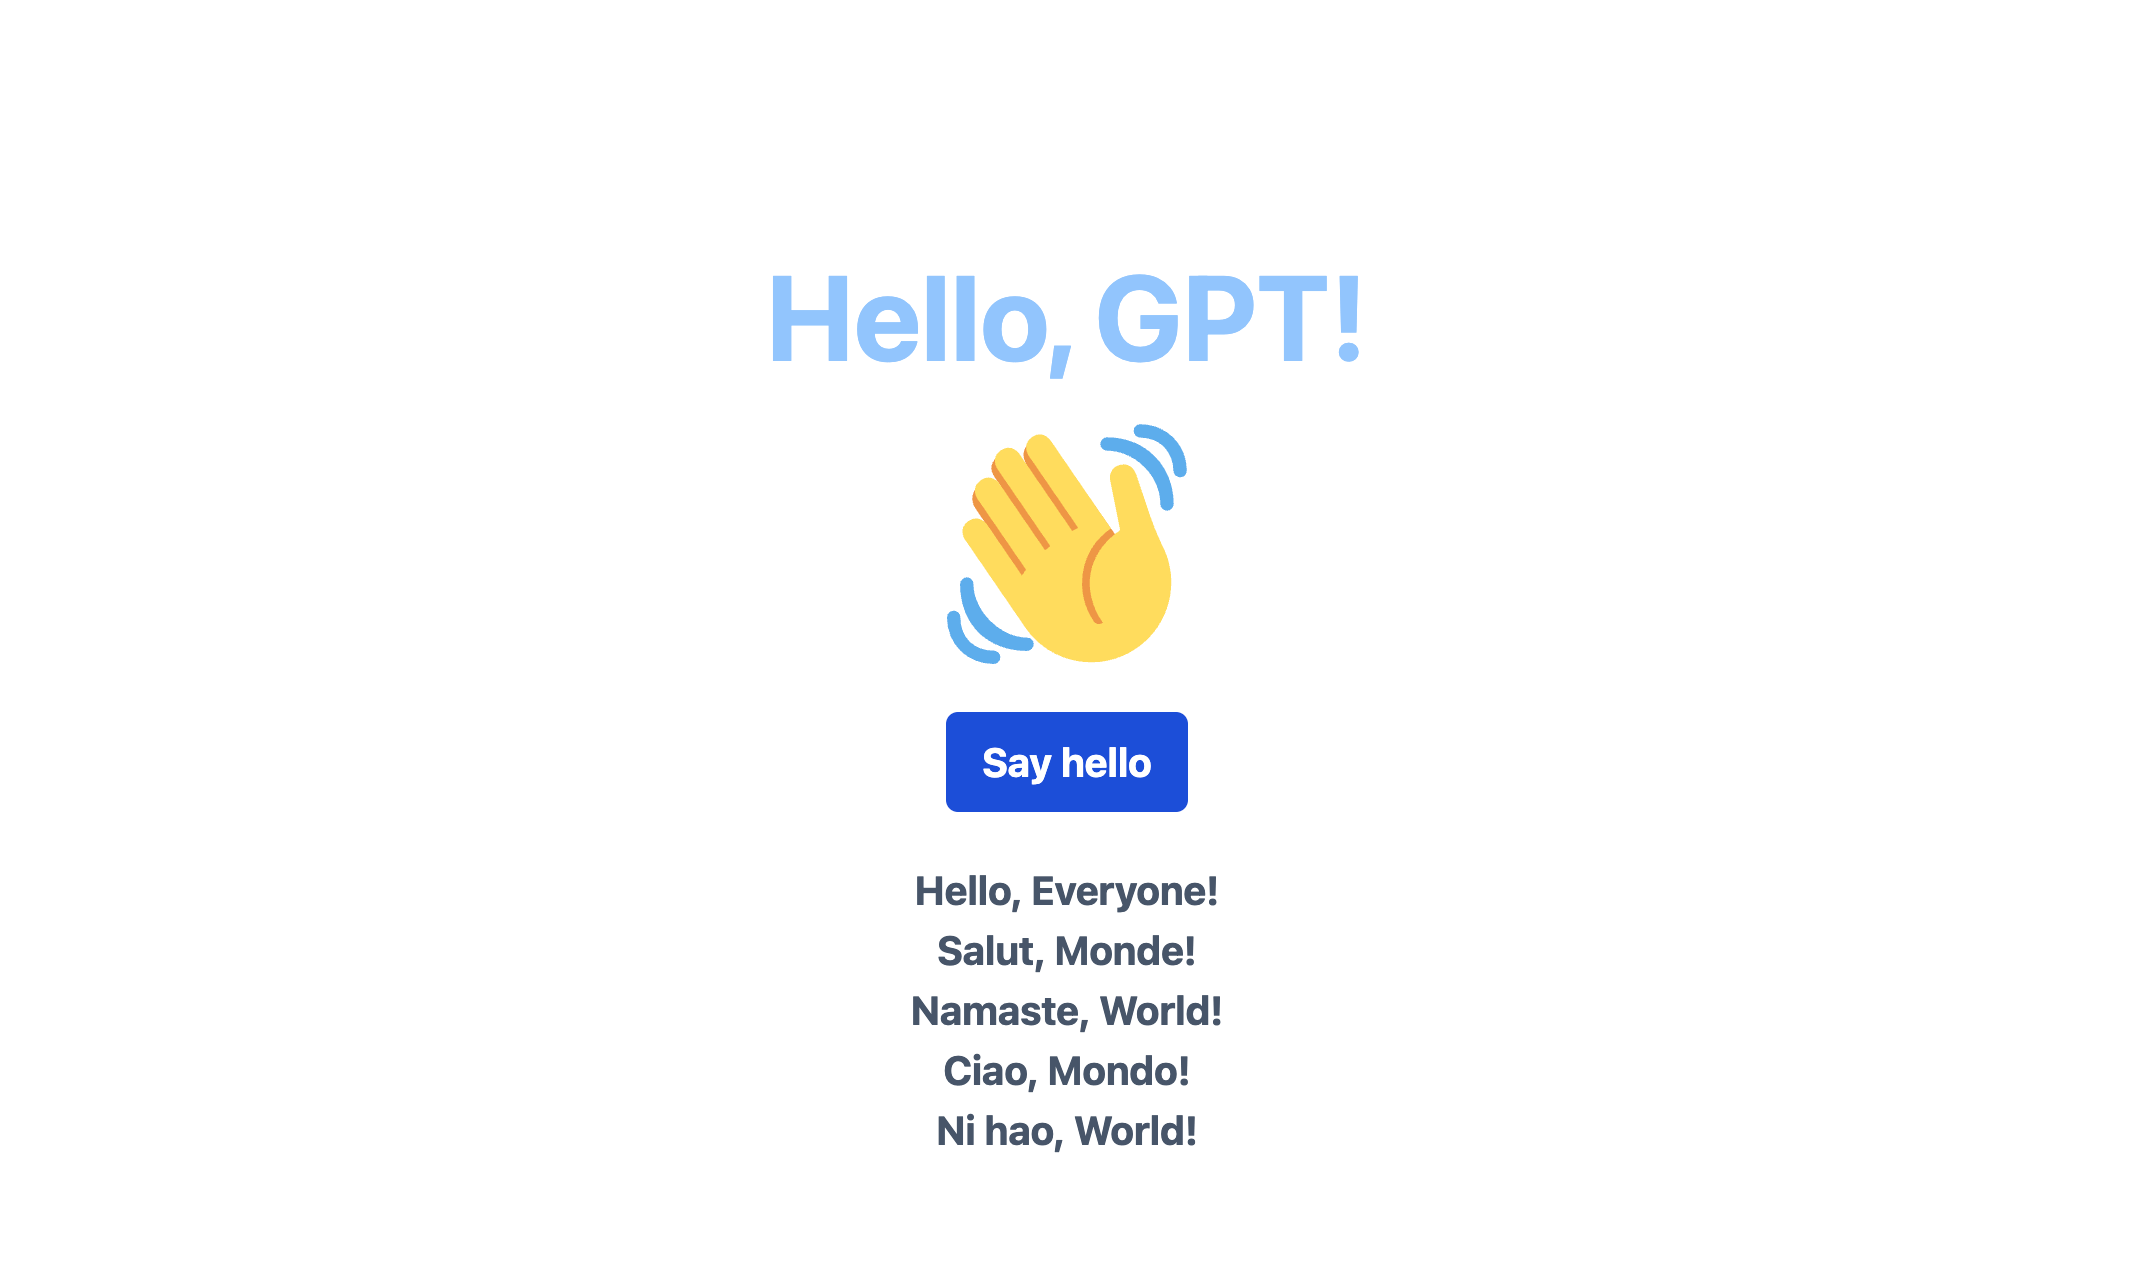 "Hello, GPT!": The UI of our web app after clicking the "Say hello" button.